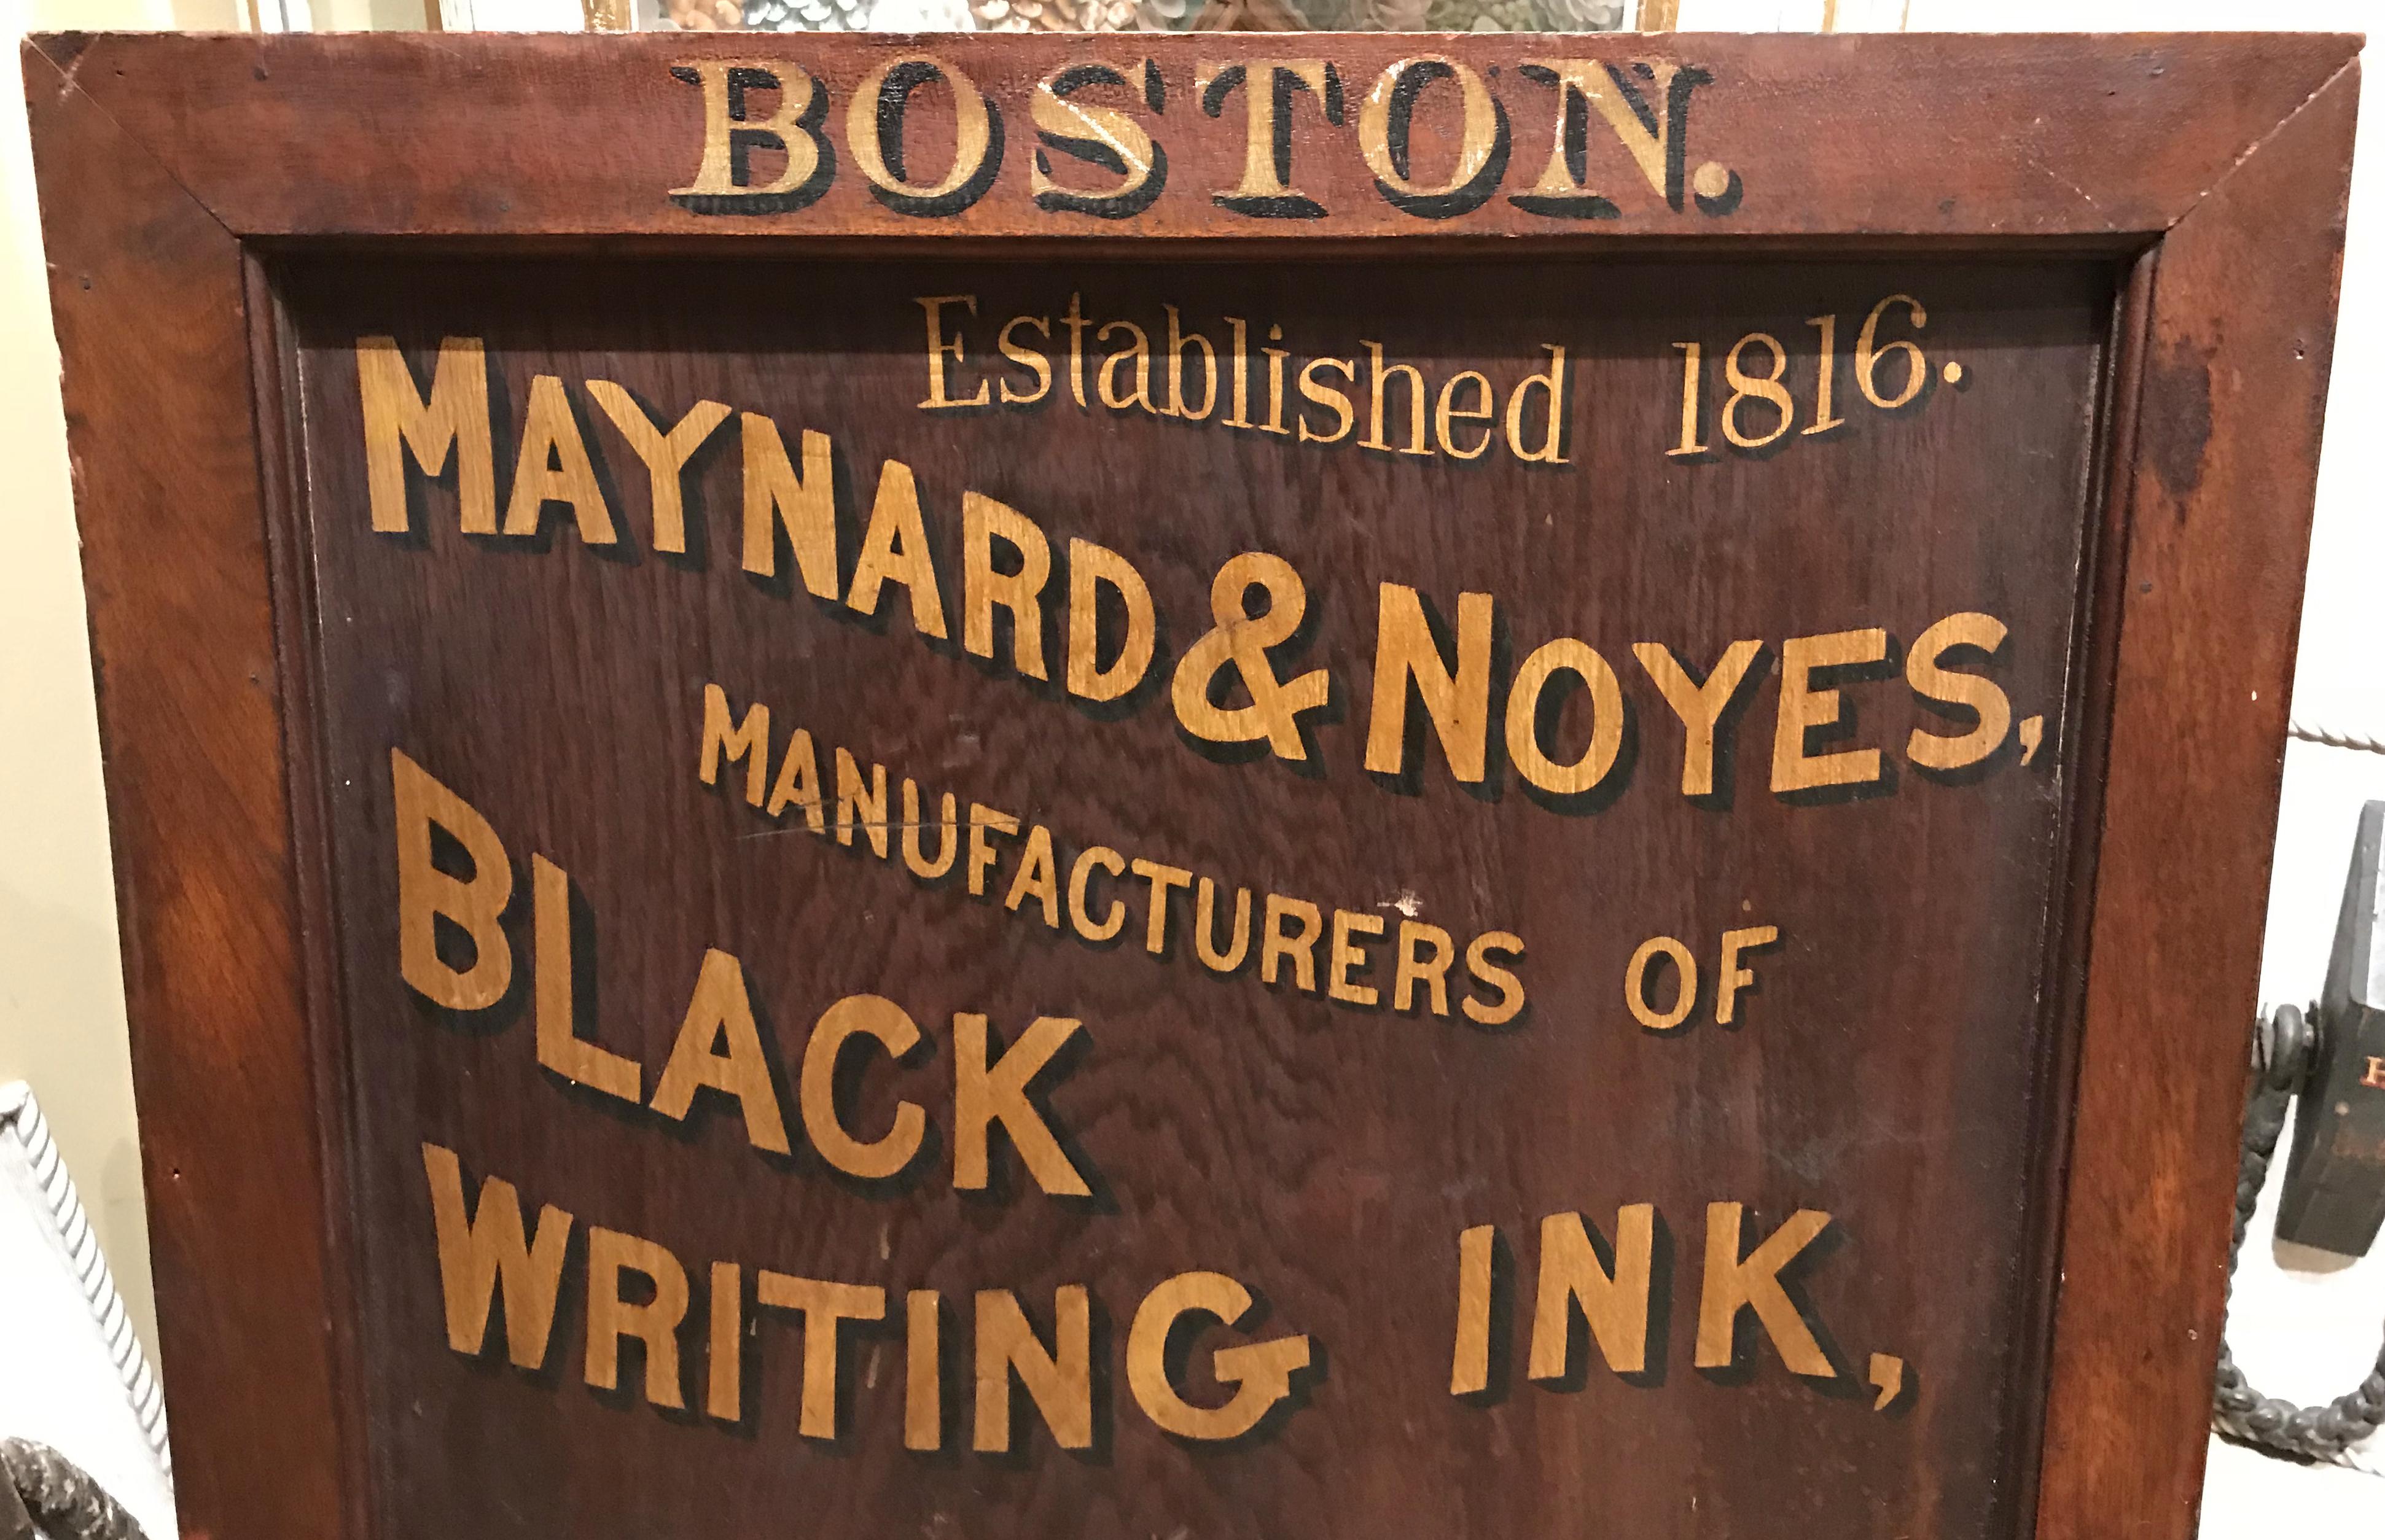 A fine hand painted poplar or oak wooden sign with wooden frame for Maynard & Noyes Ink Company, Boston, Massachusetts, which reads “Boston, Established 1816, Maynard & Noyes, Manufacturers of Black Writing Ink, Copying and Writing Ink, Carmine,